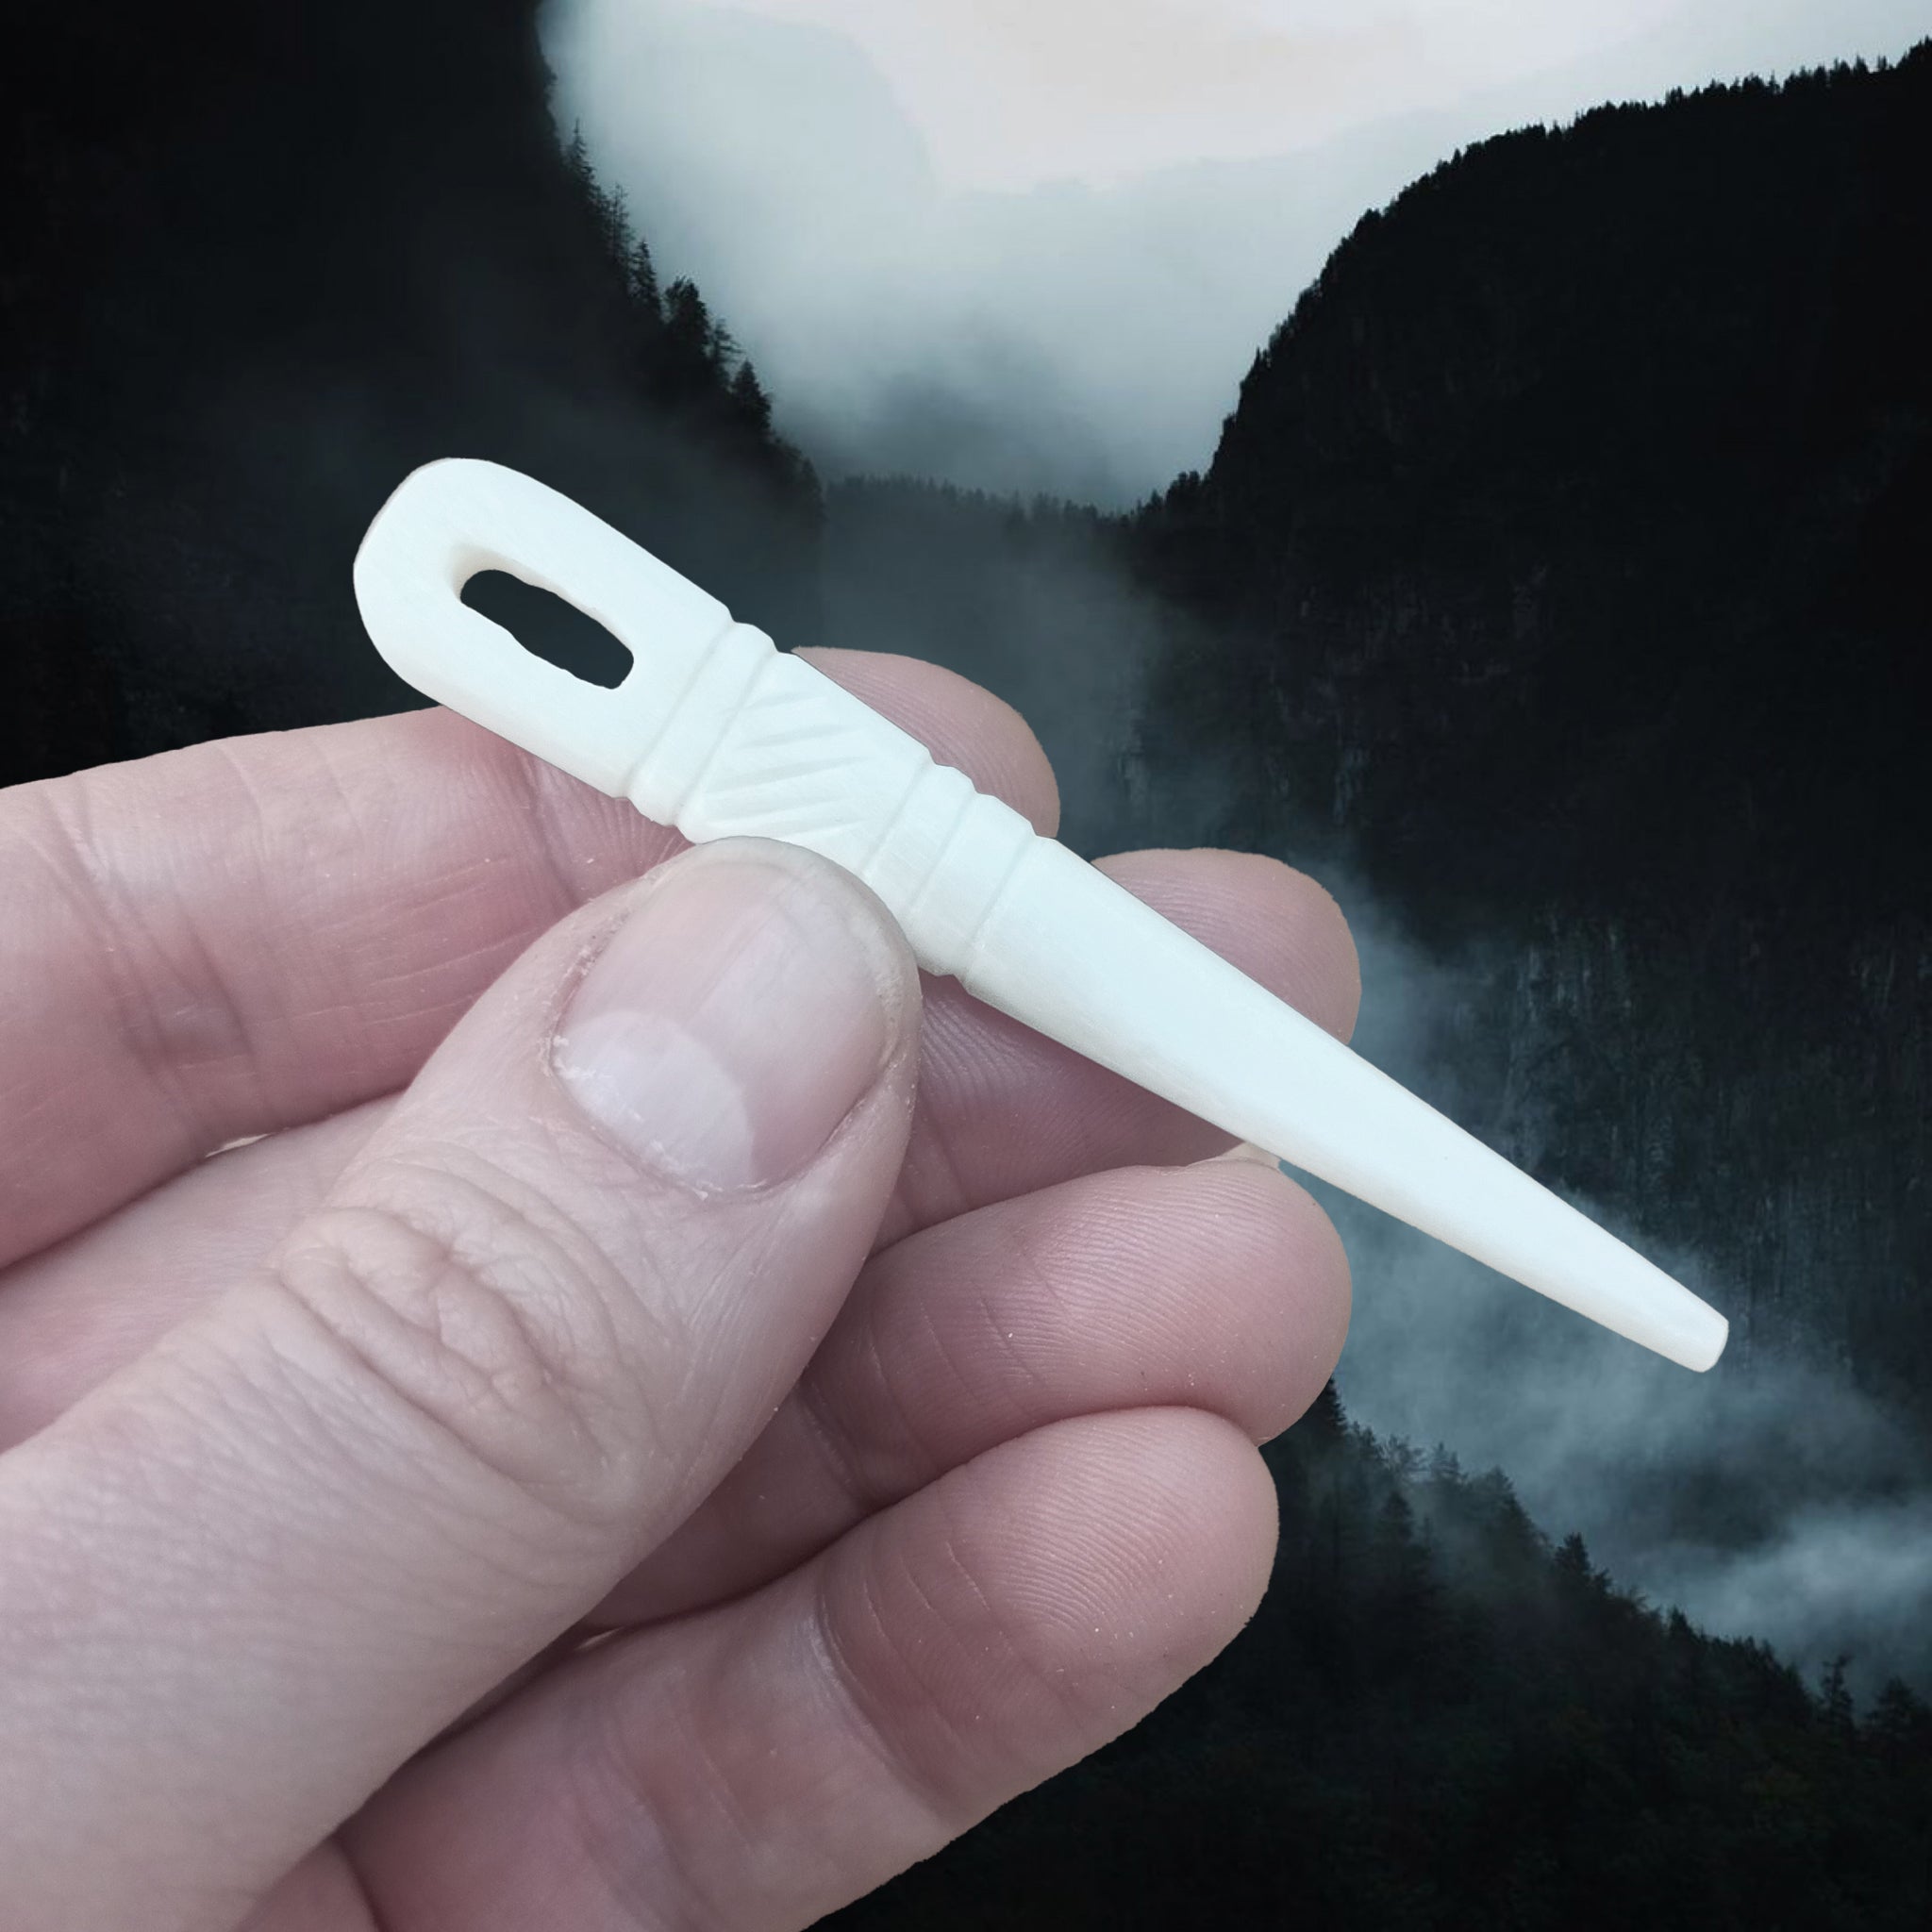 Handmade Bone Viking Nalbinding Needle in Smaller Size with Hand-Carved Decorations in Fingers